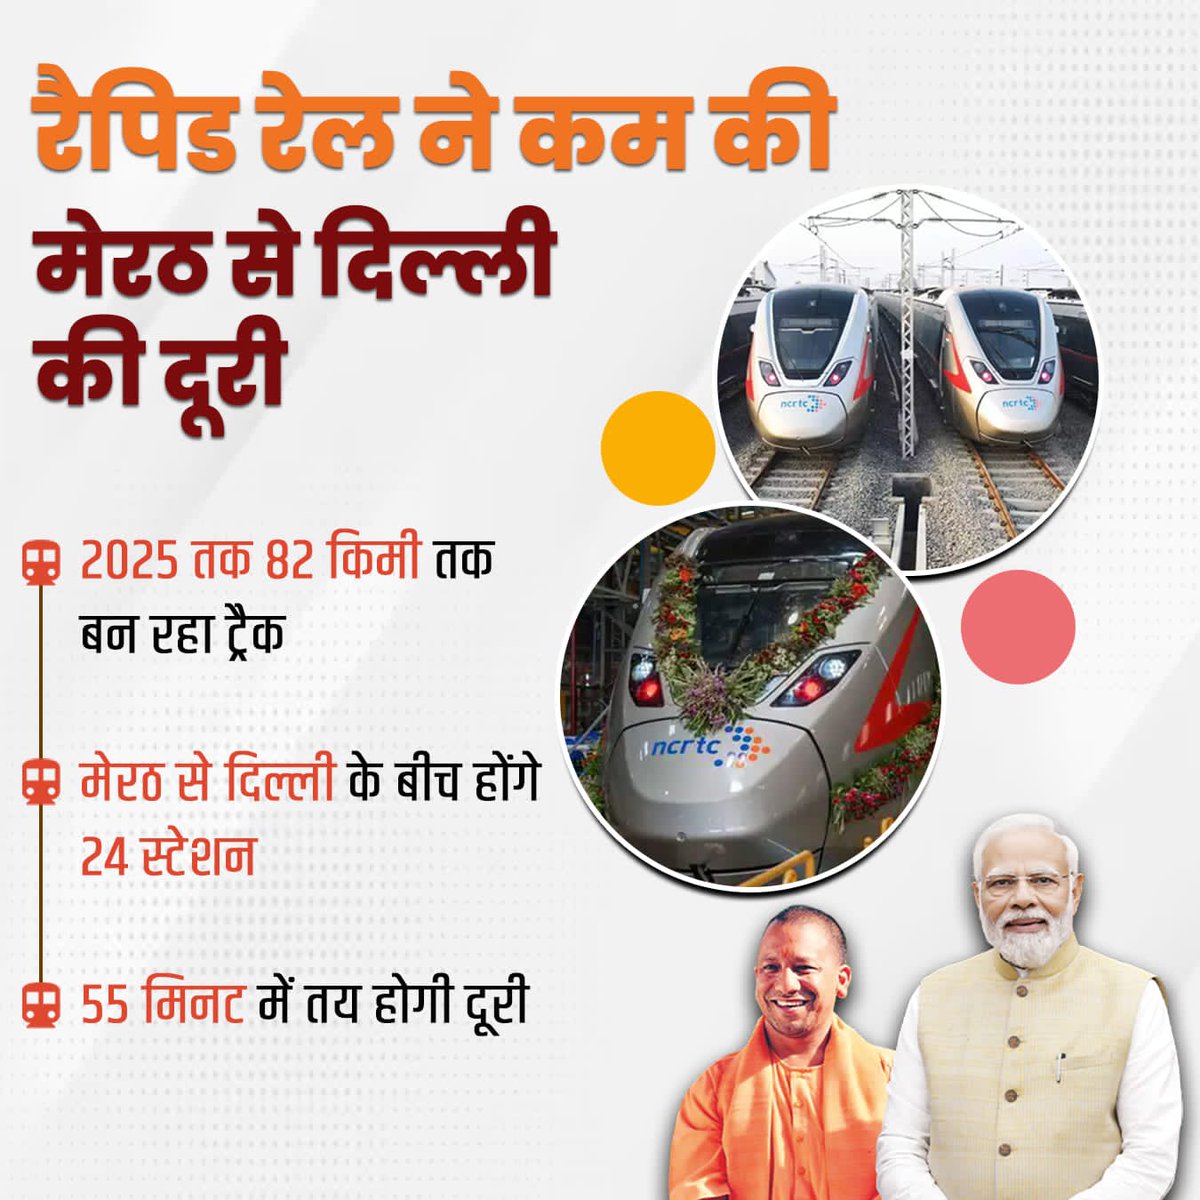 Railways were developed in western UP so that metros like Delhi can be reached easily and business can be promoted. Vote for BJP #WestUPWithBJP